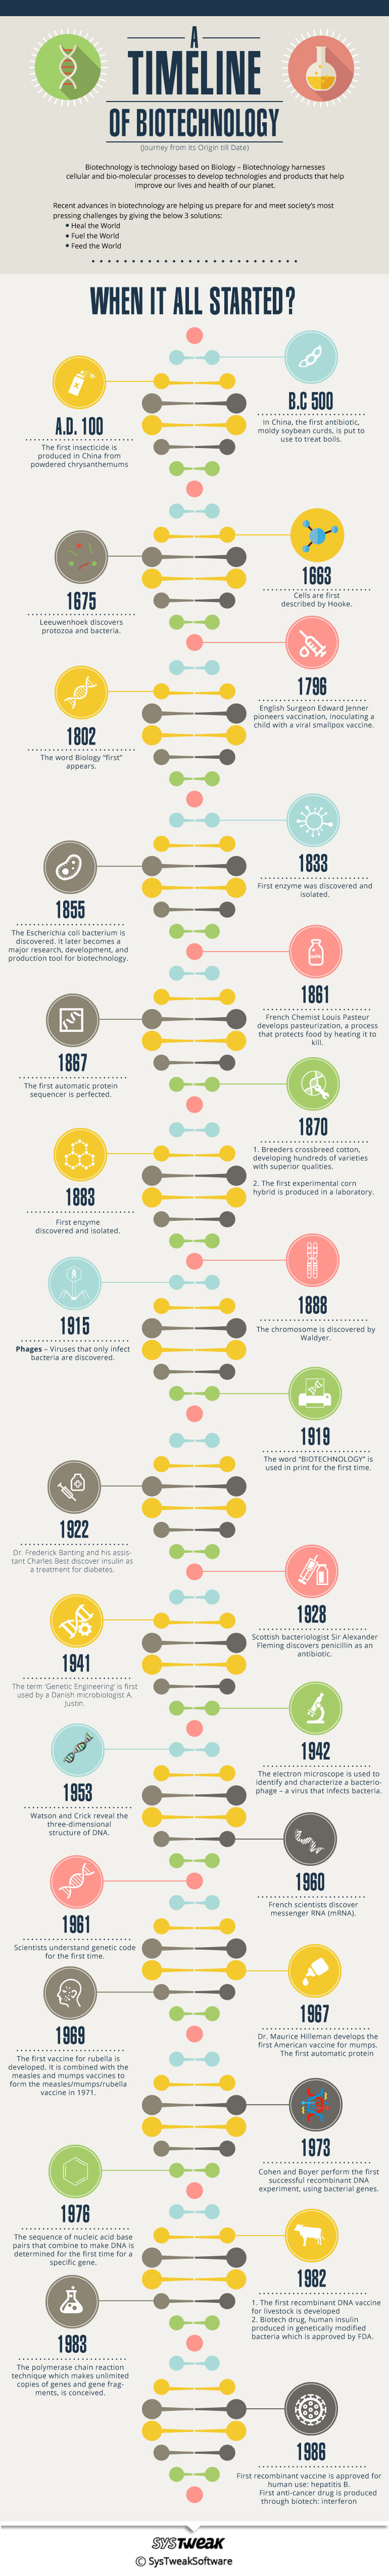 A Timeline of Developments in Biotechnology Infographic